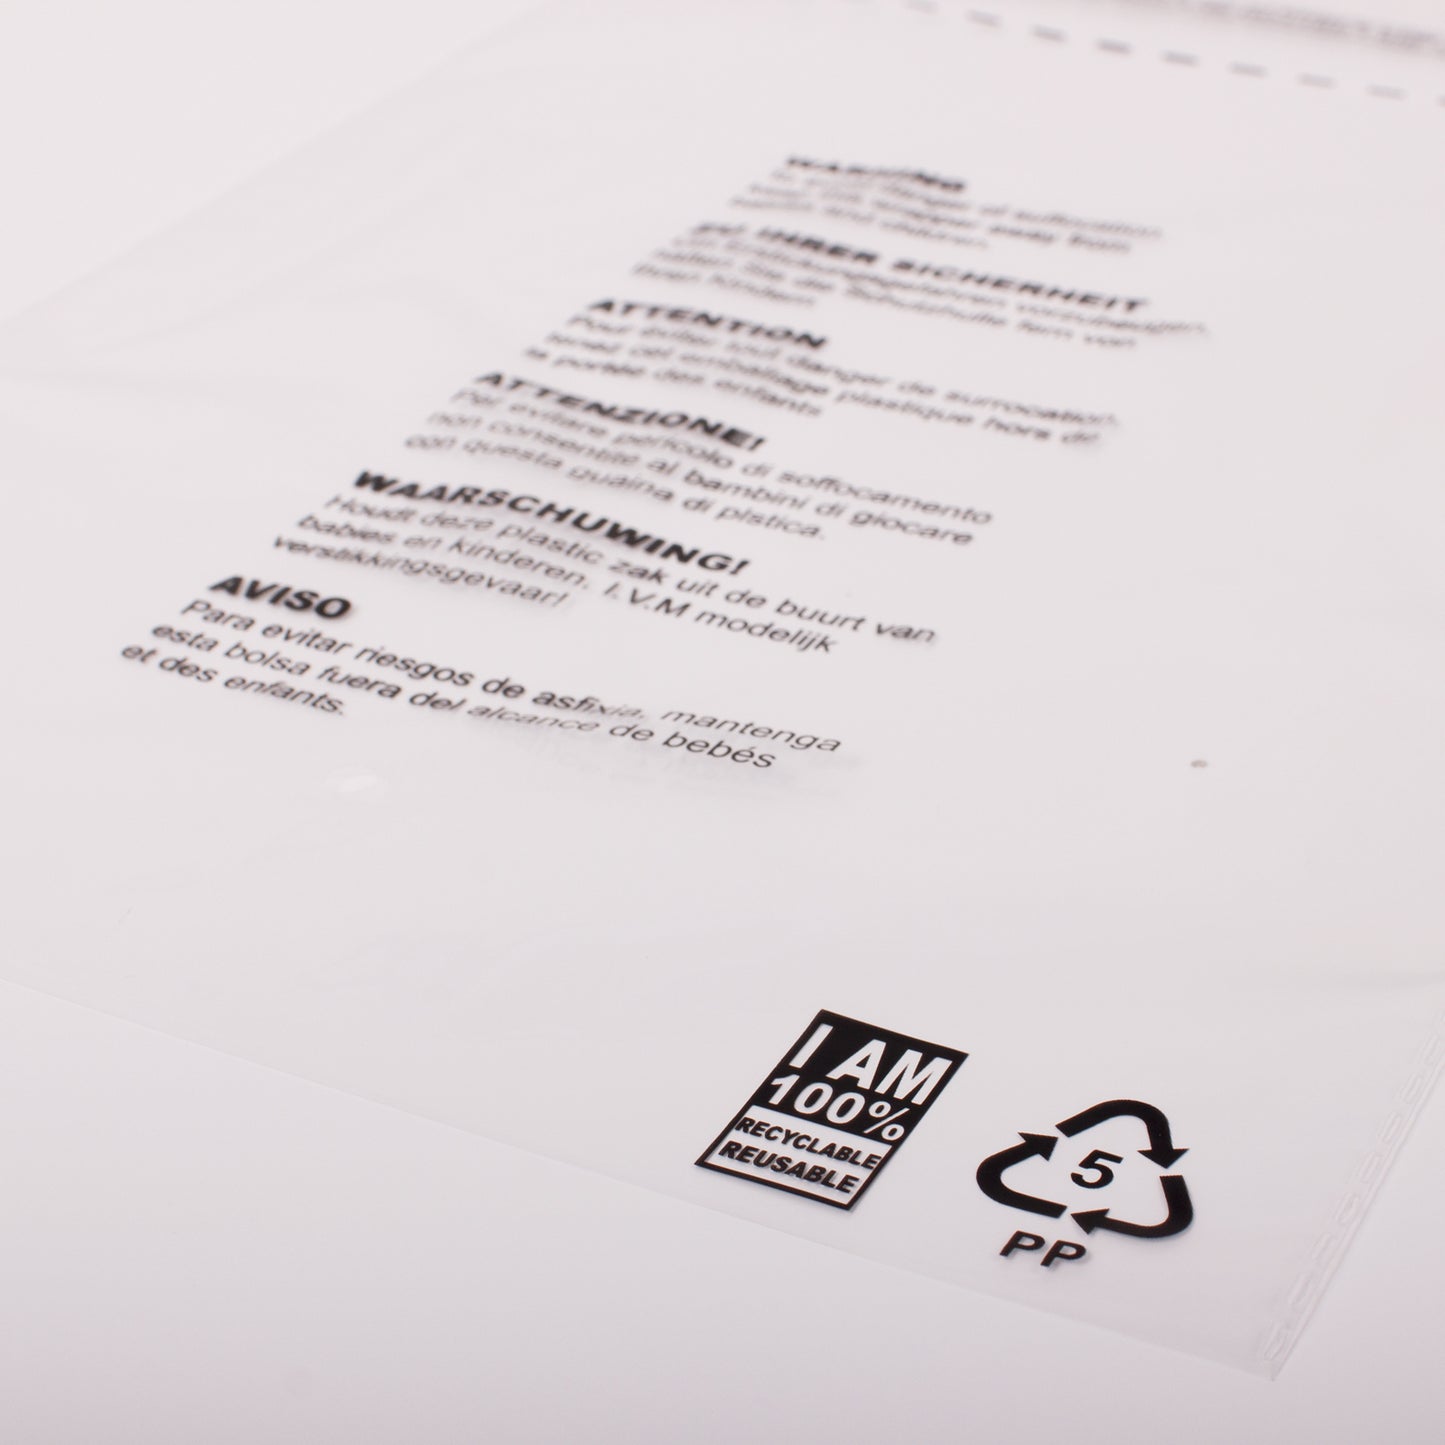 15 x 20 Clear Mailing Bag with 'I AM 100% RECYCLABLE'